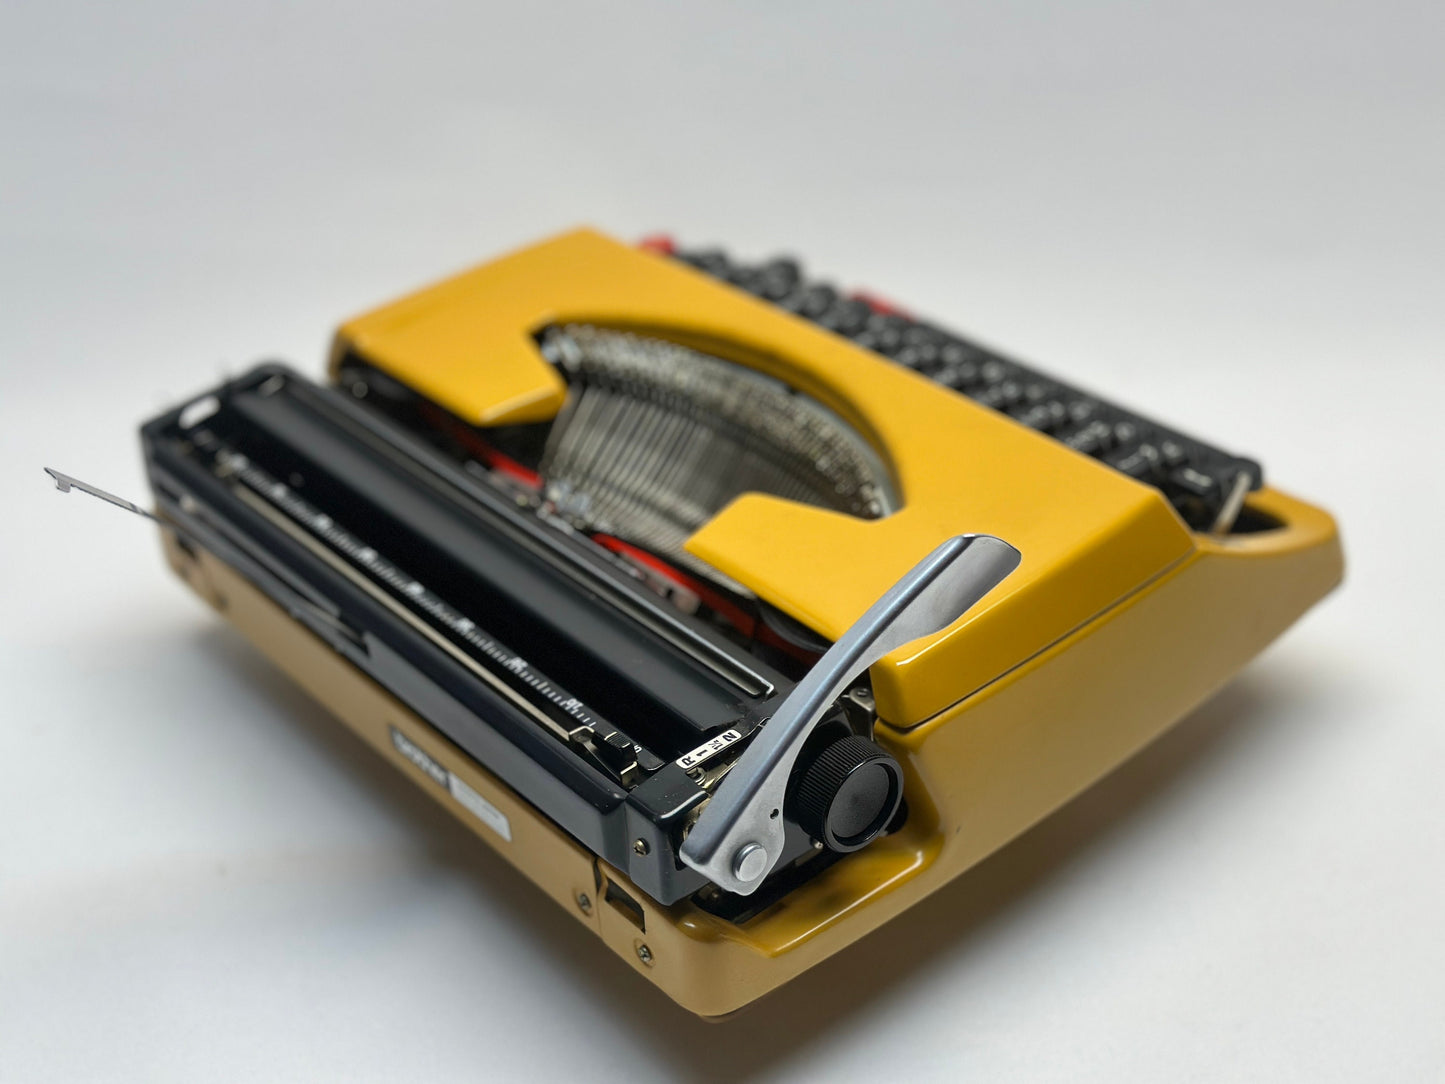 Yellow Brother Typewriter - Classic Elegance with Black Keyboard and Bag, Red Tab Key, Ideal Gift Choice